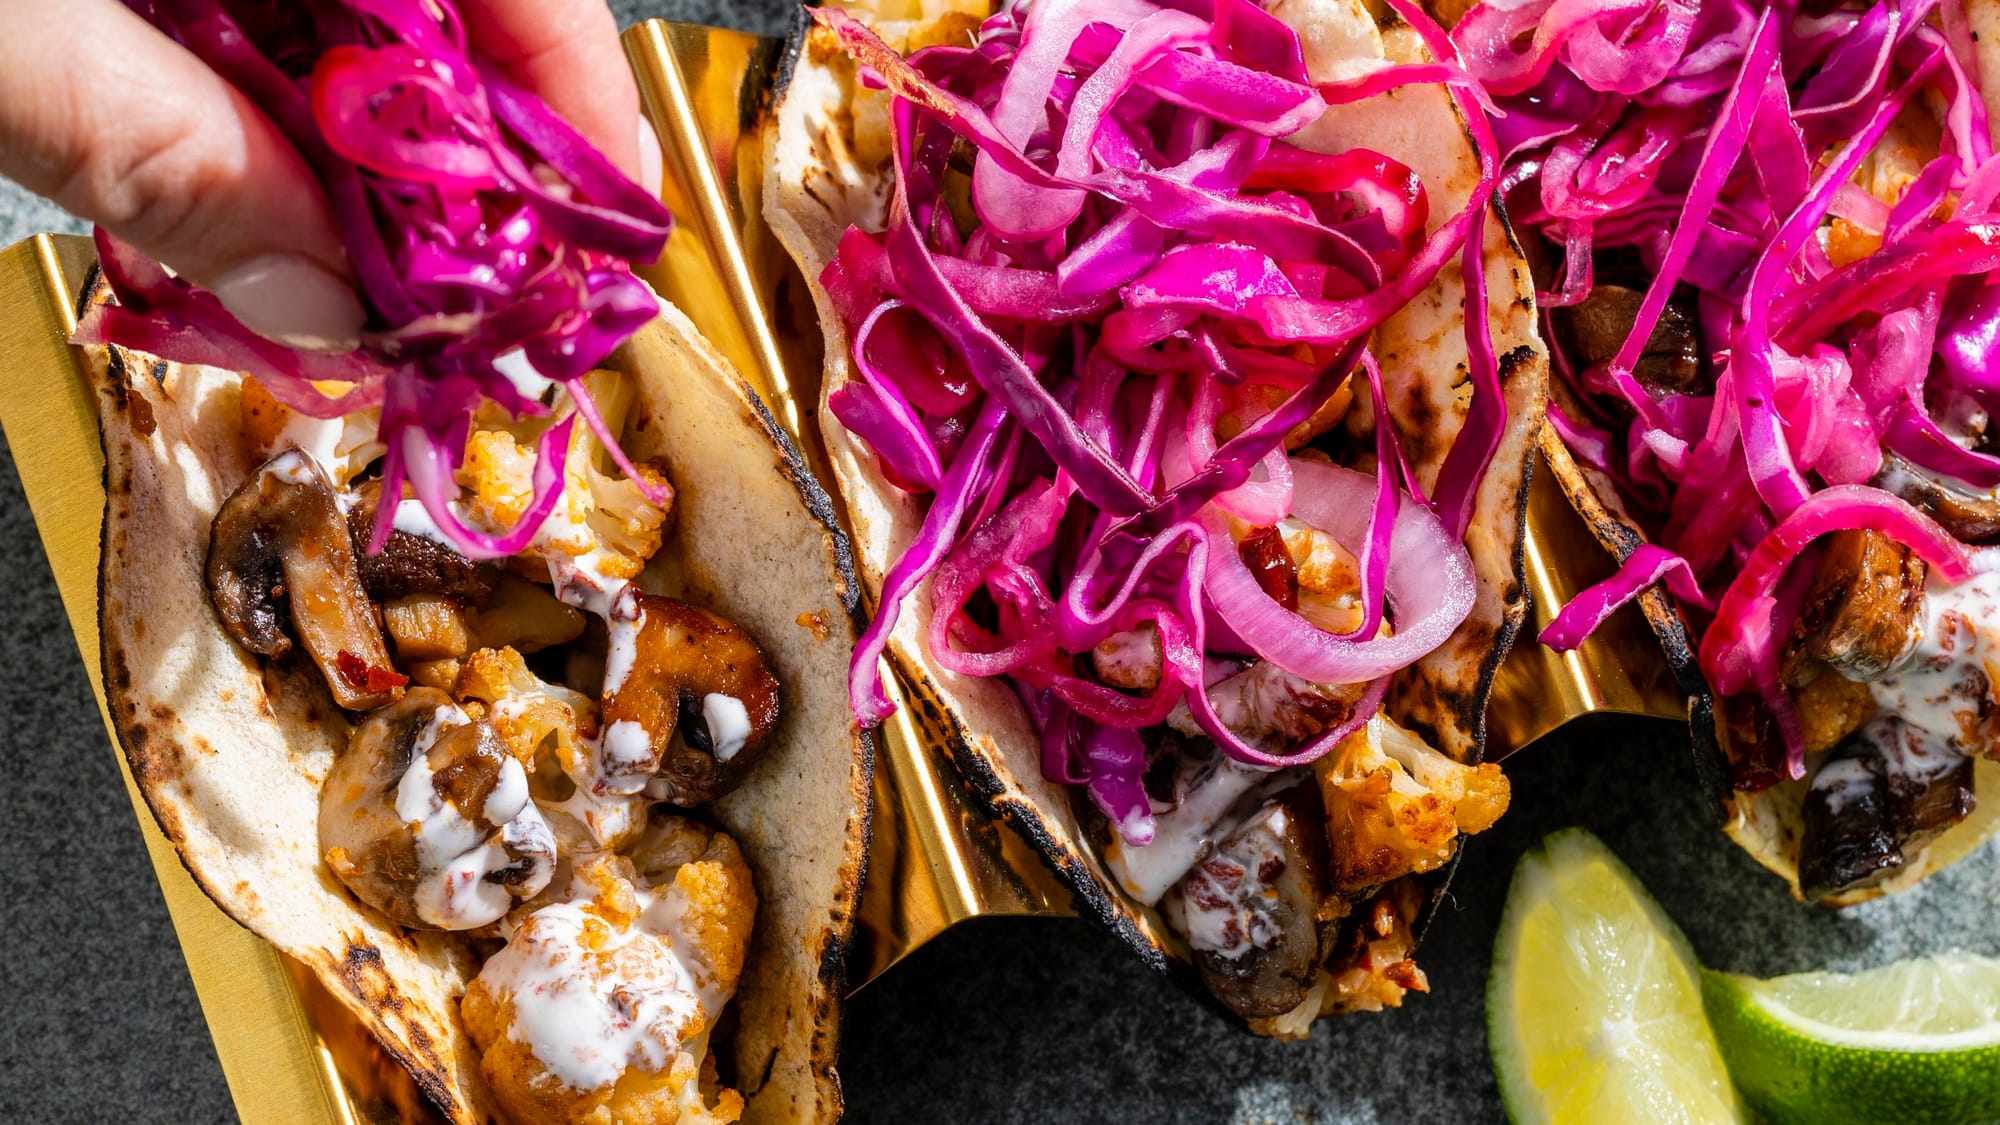                      This is one irresistible vegetarian taco                             
                     